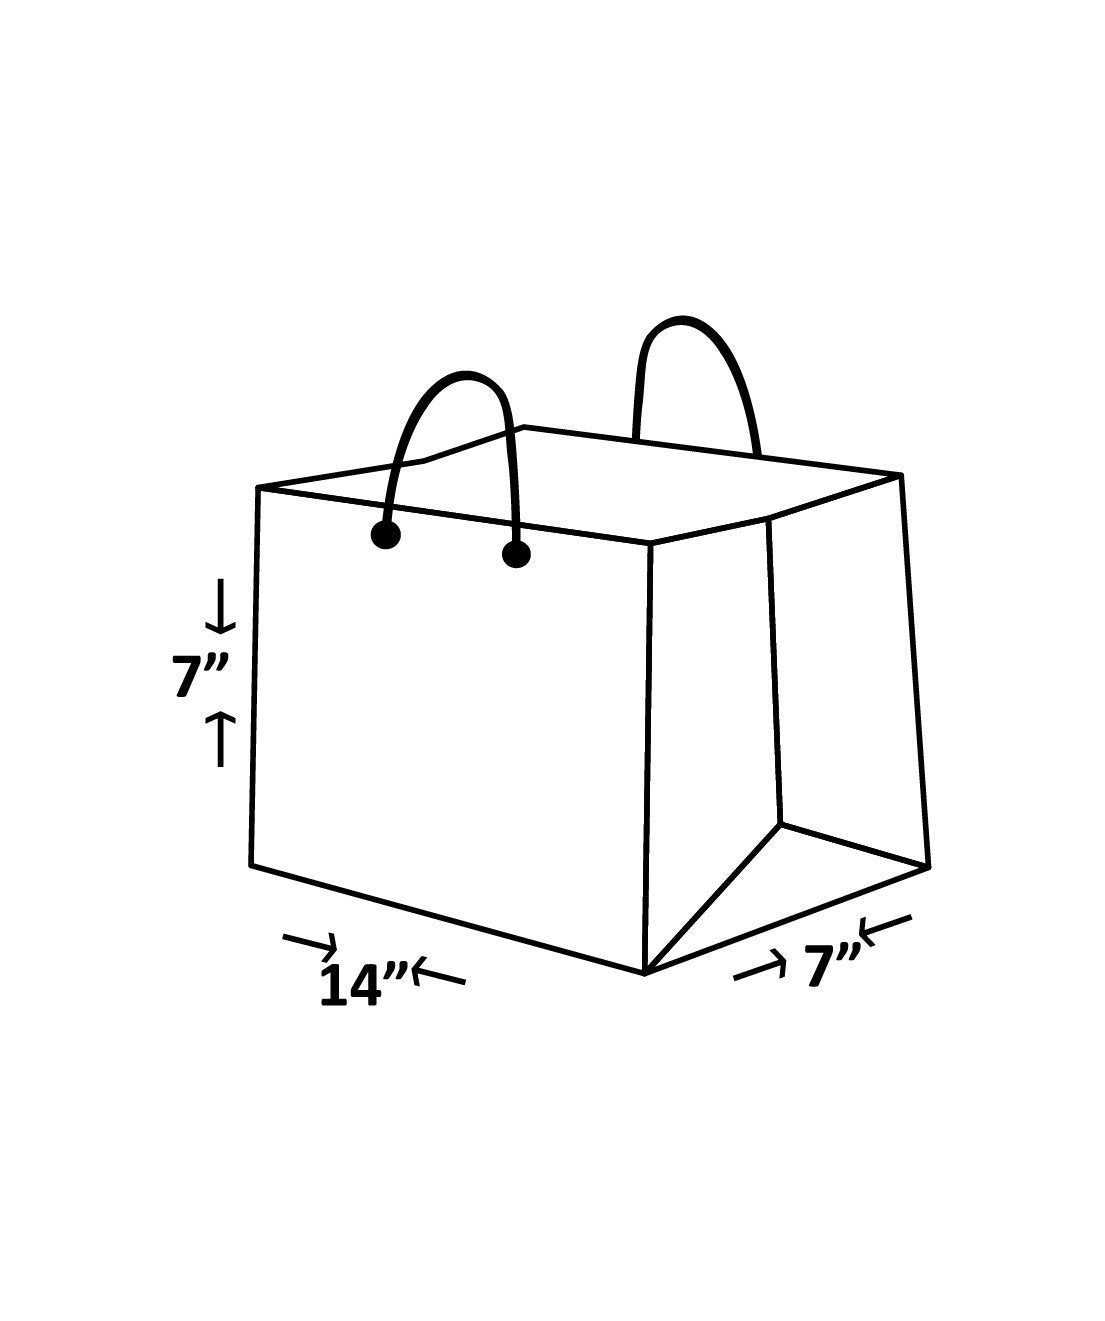 Craft Line Pattern Paper Design Bag for Packing Paper Bags